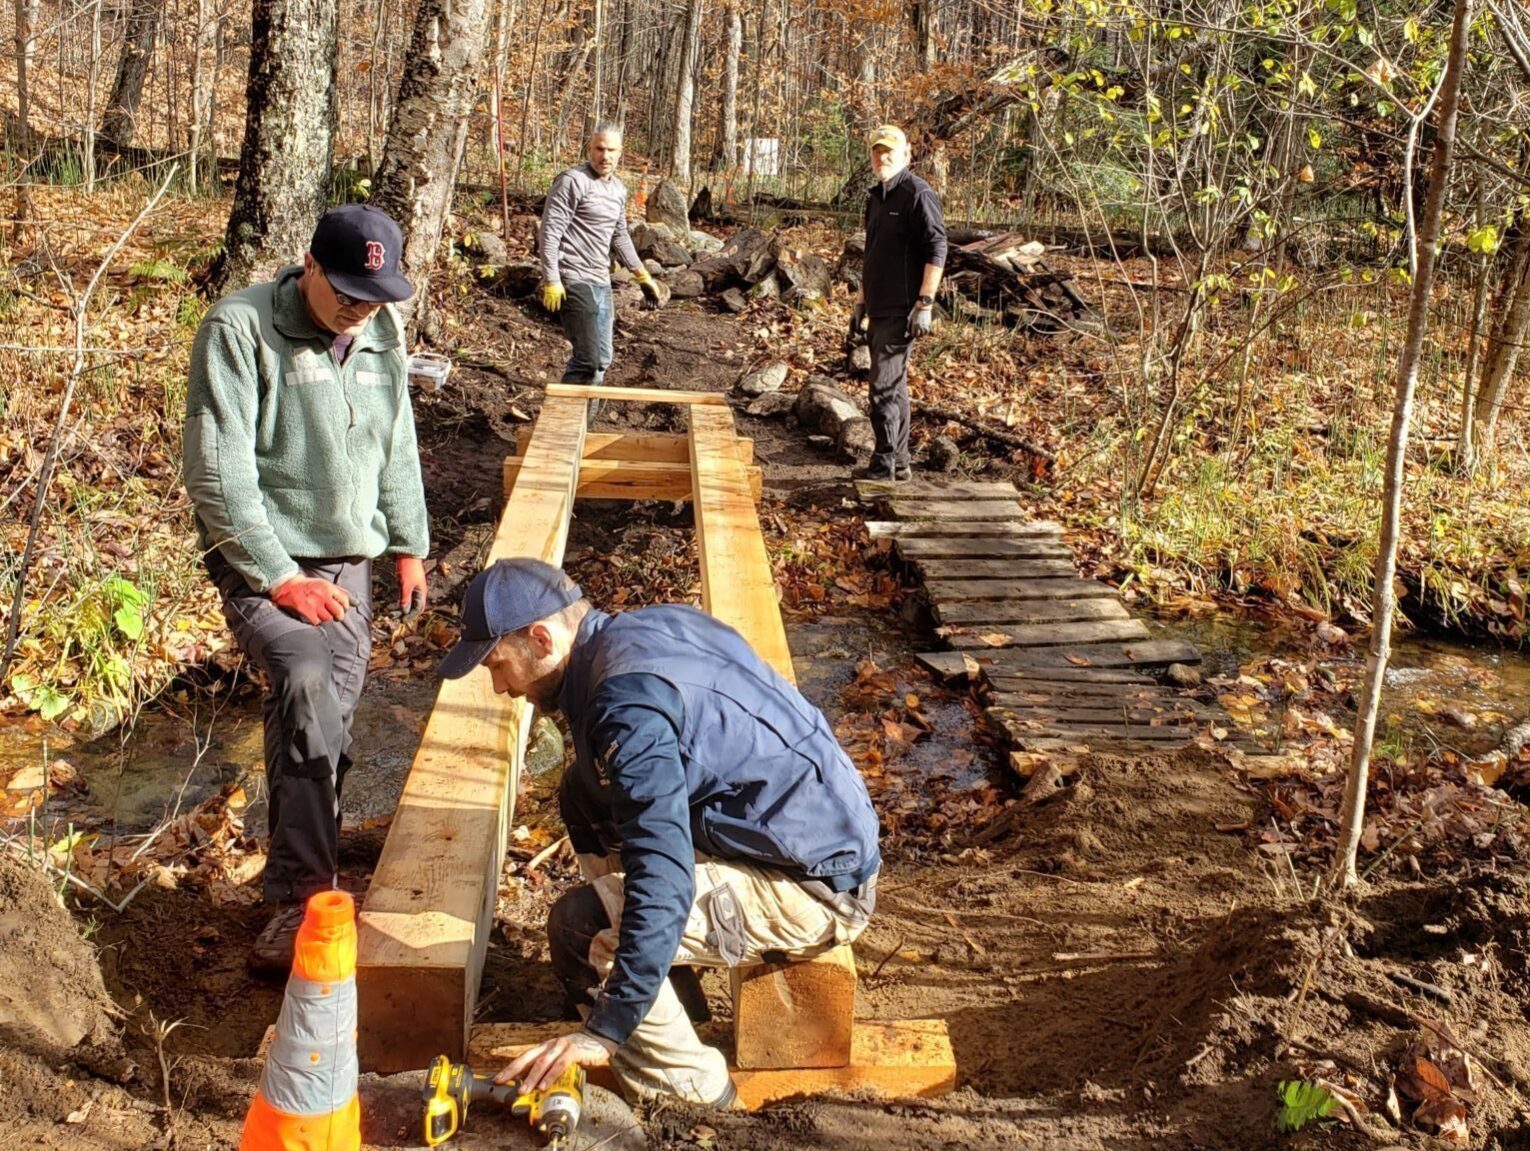 Workers building a wooden bridge over a trail.